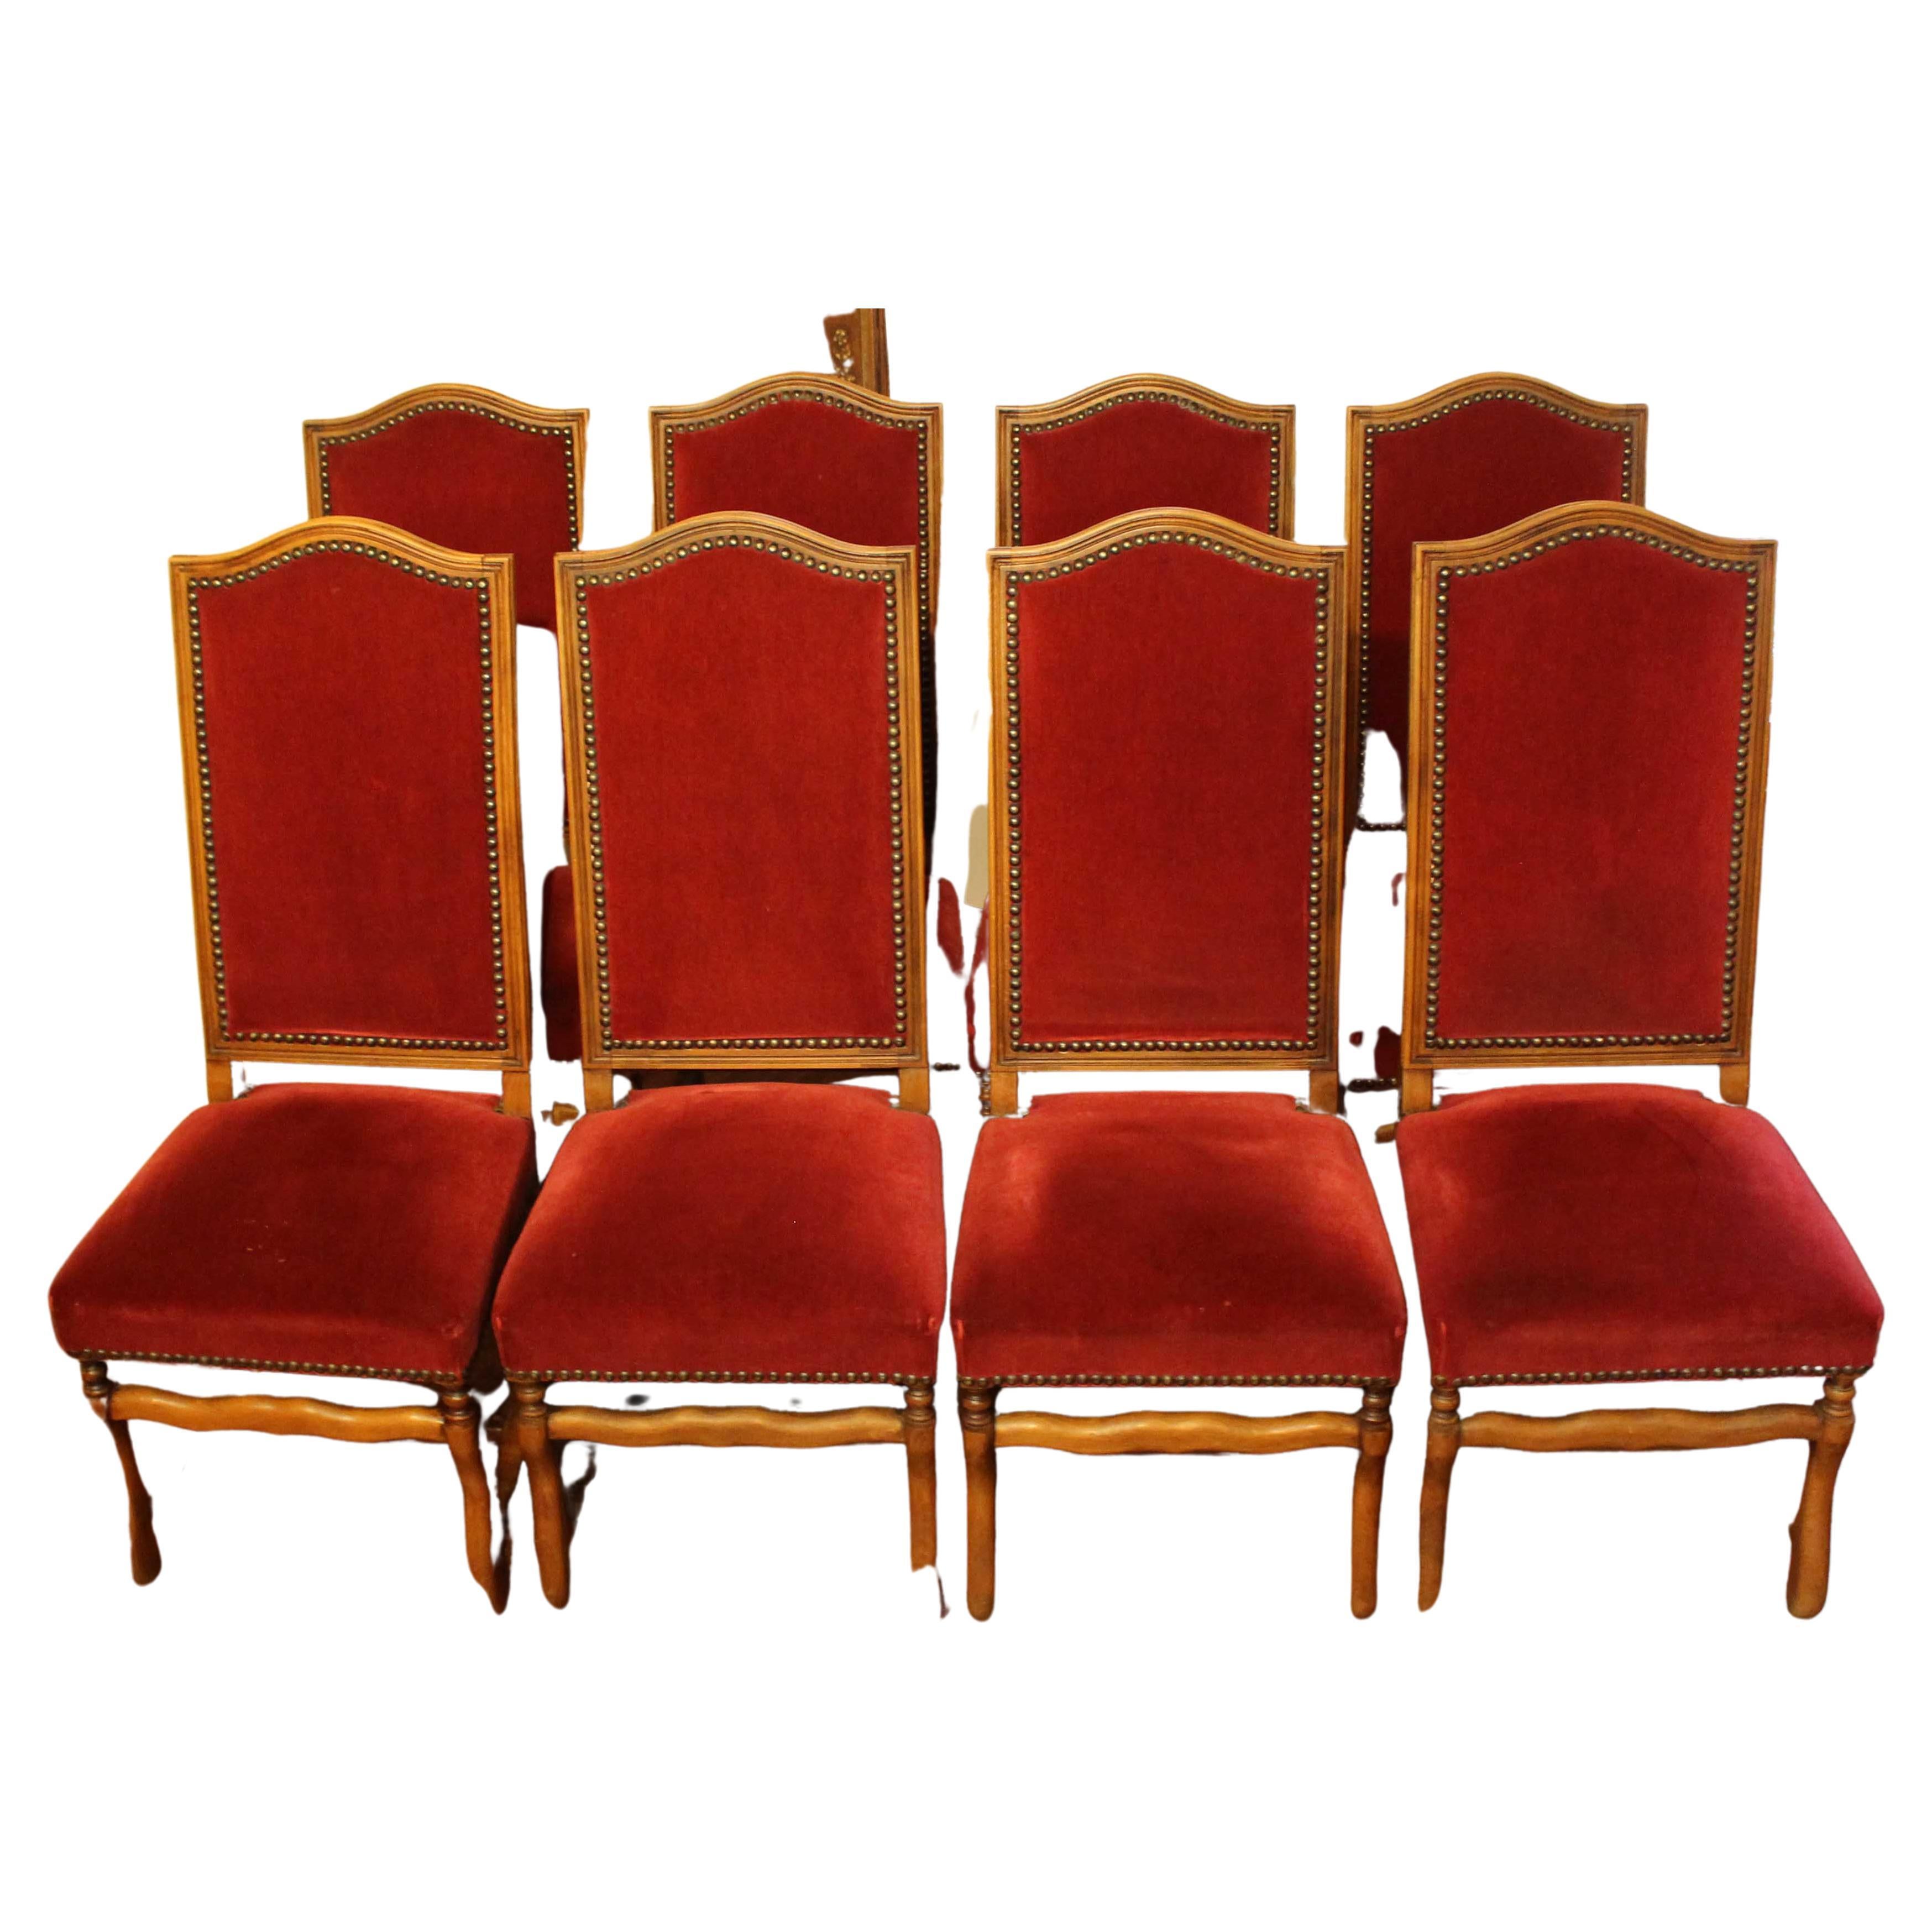 circa 1890s Set of 8 Dining Chairs, French, Louis XIII Style